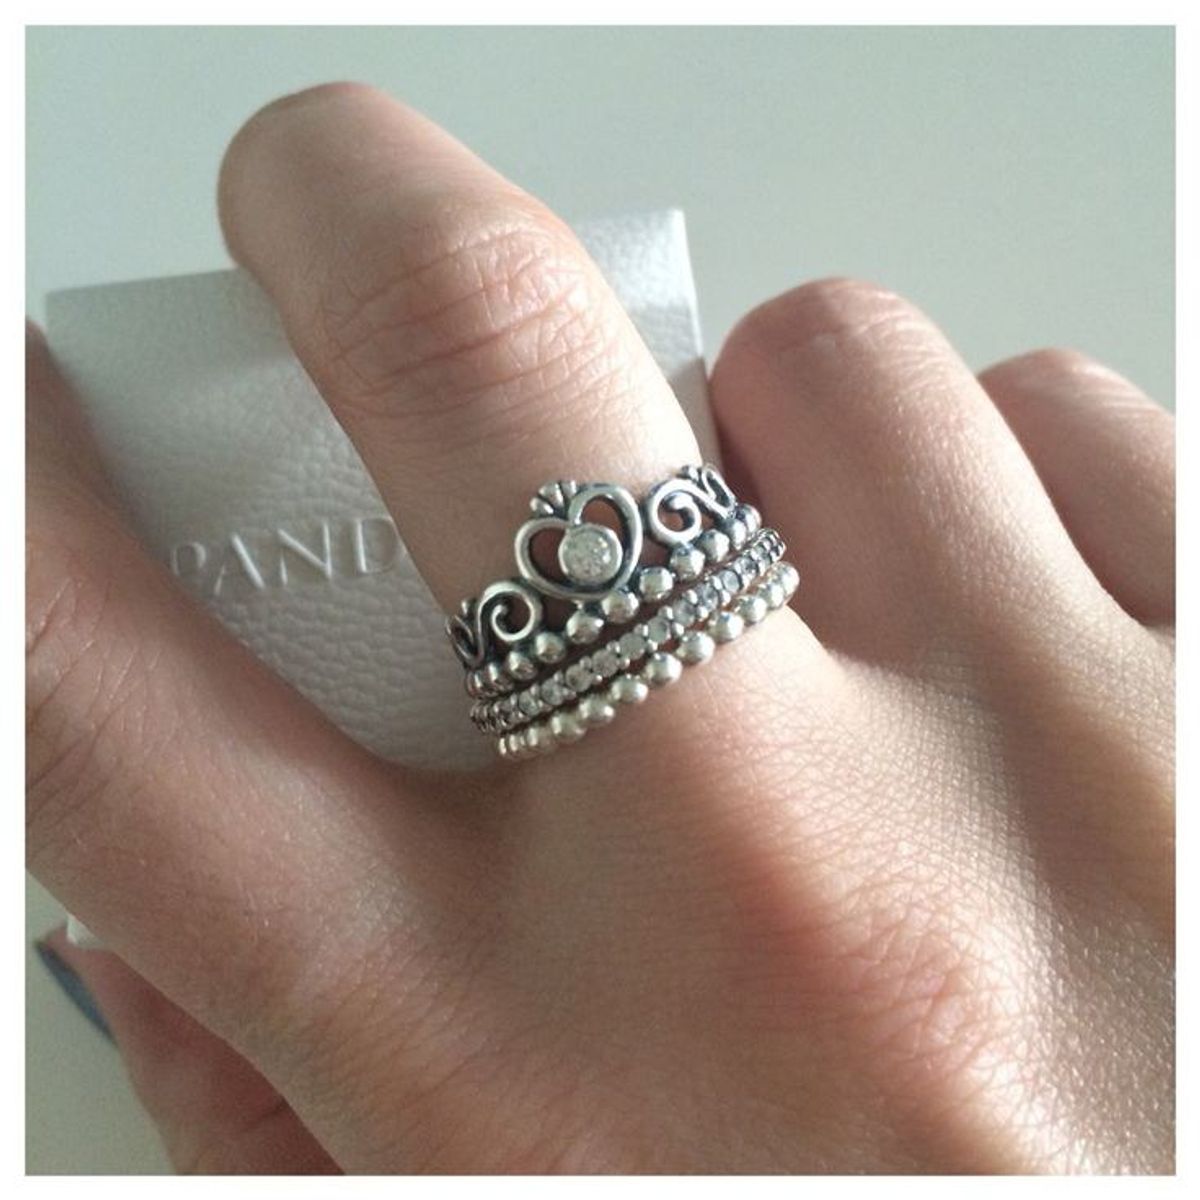 The Princess Pandora Ring: Overpriced and Overrated